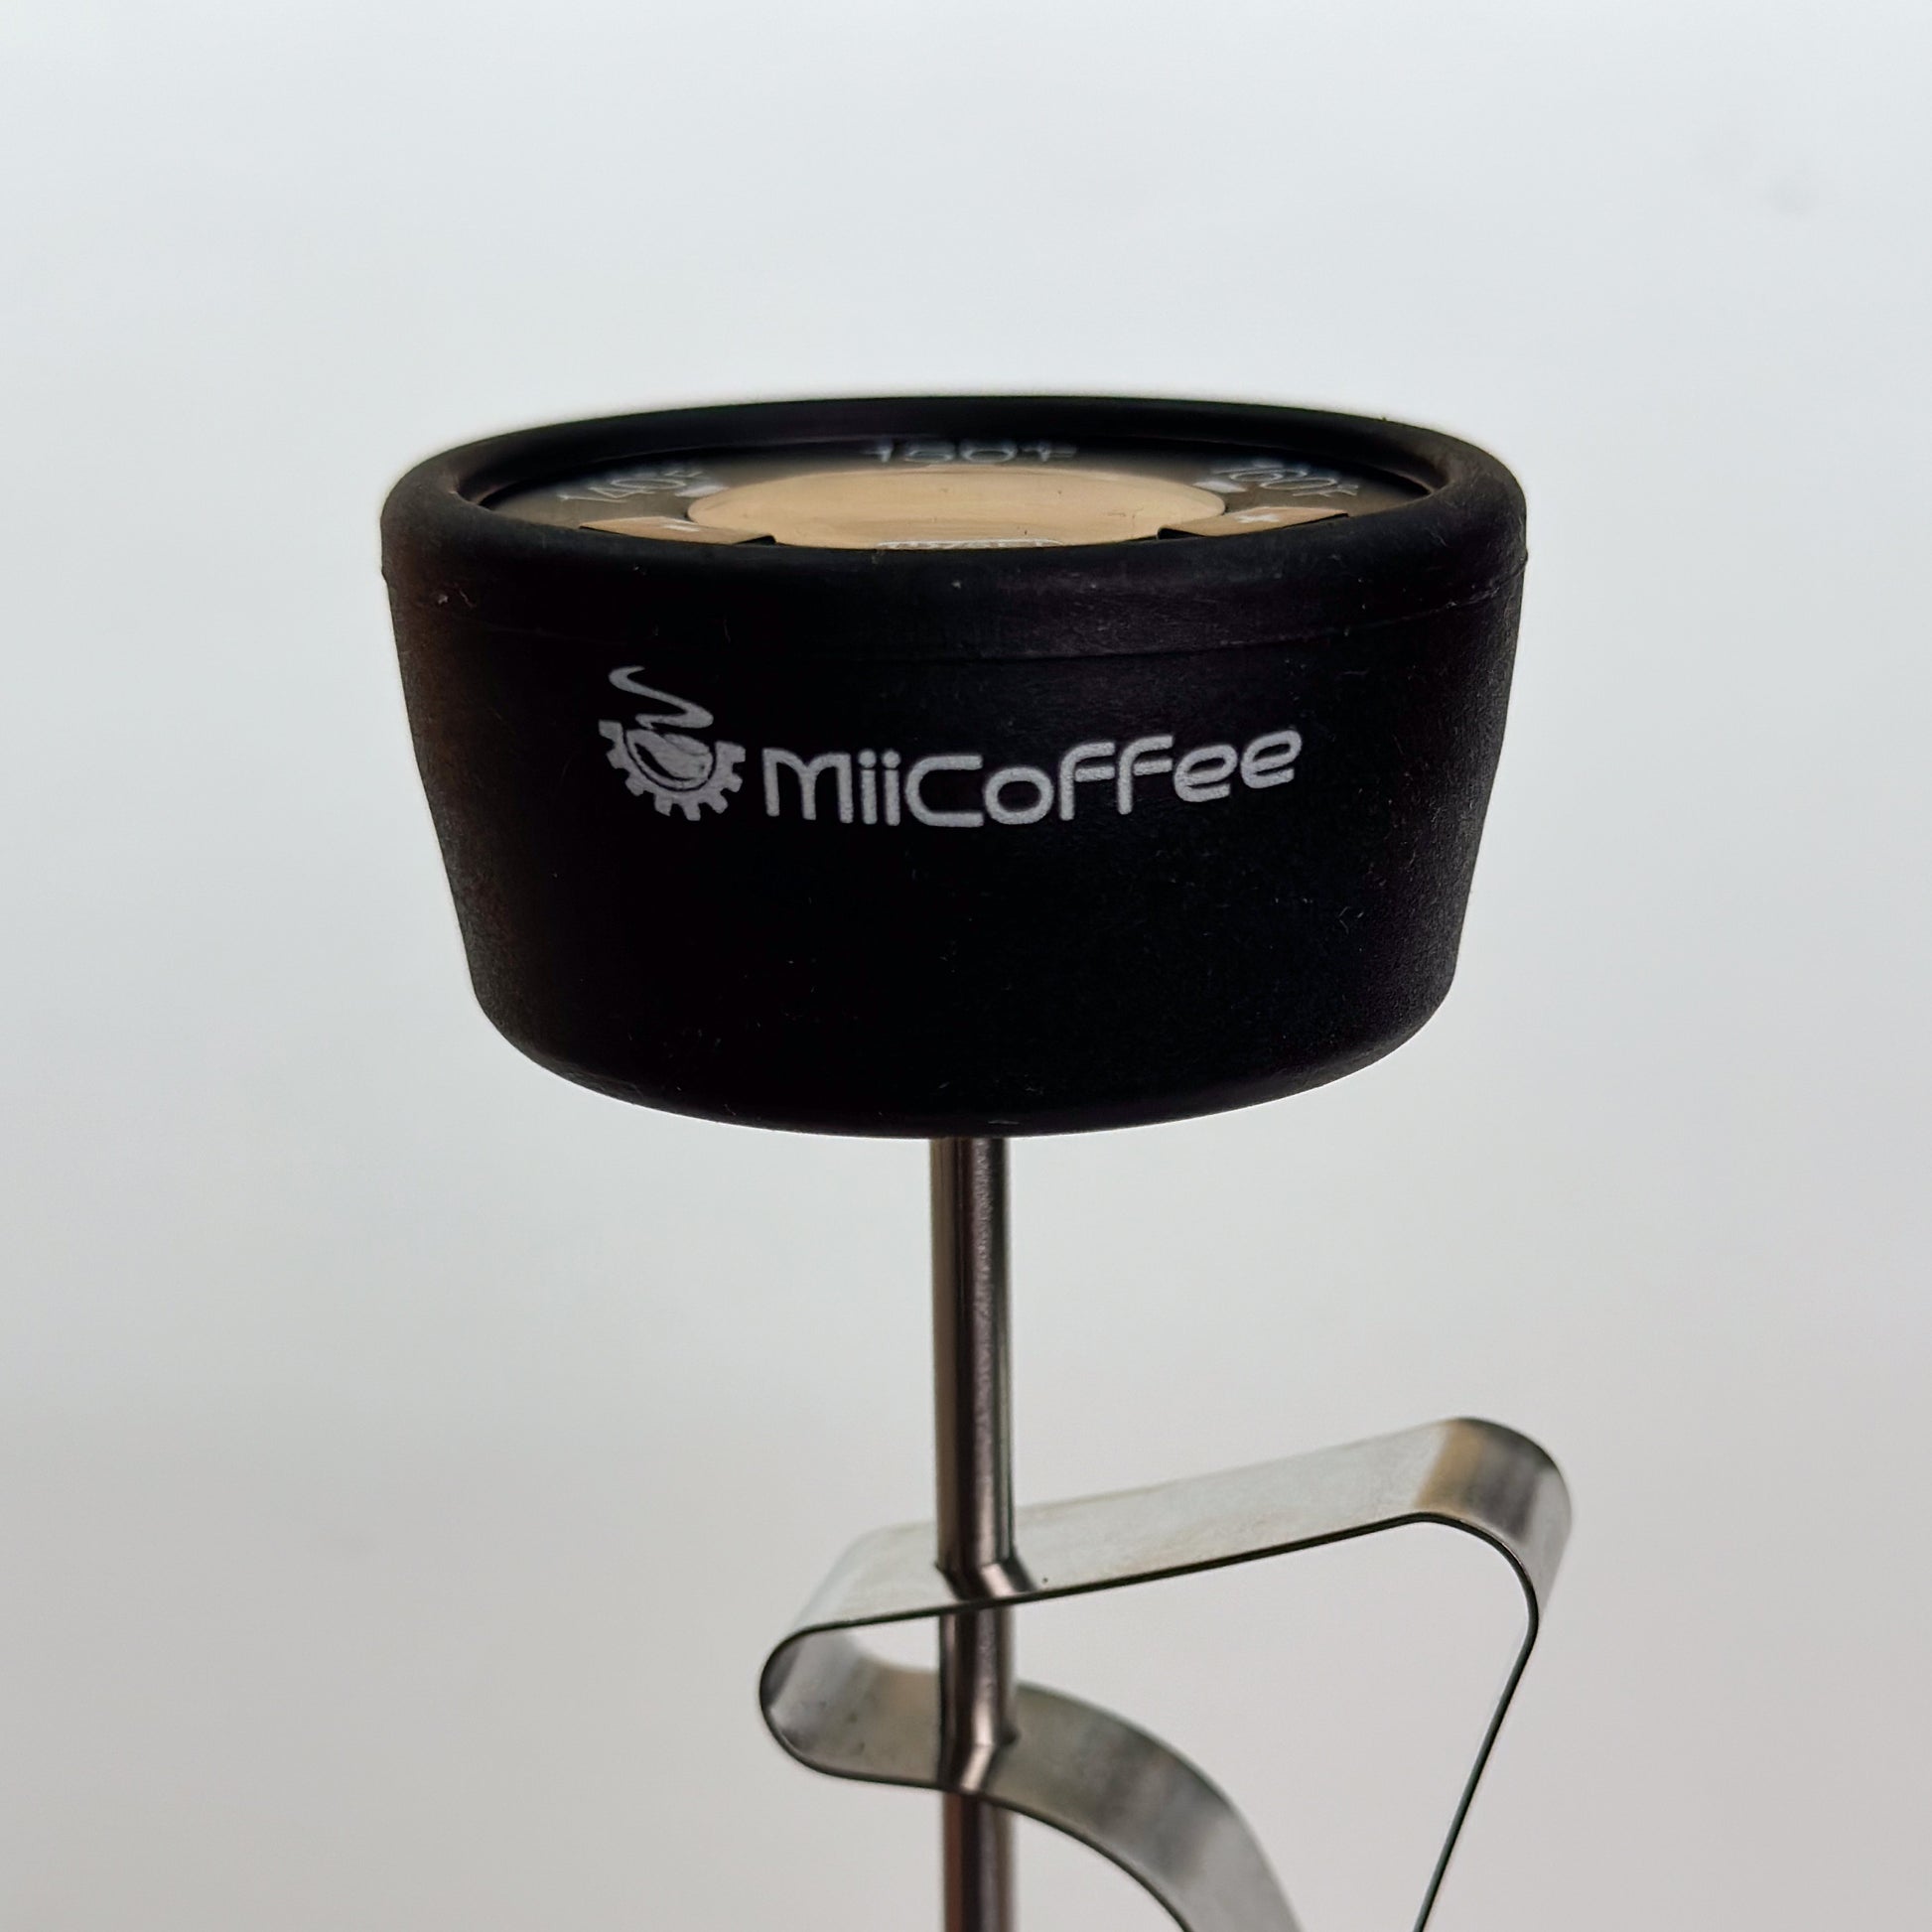 Milk Steaming & Frothing Thermometer by Joe Frex – My Espresso Shop